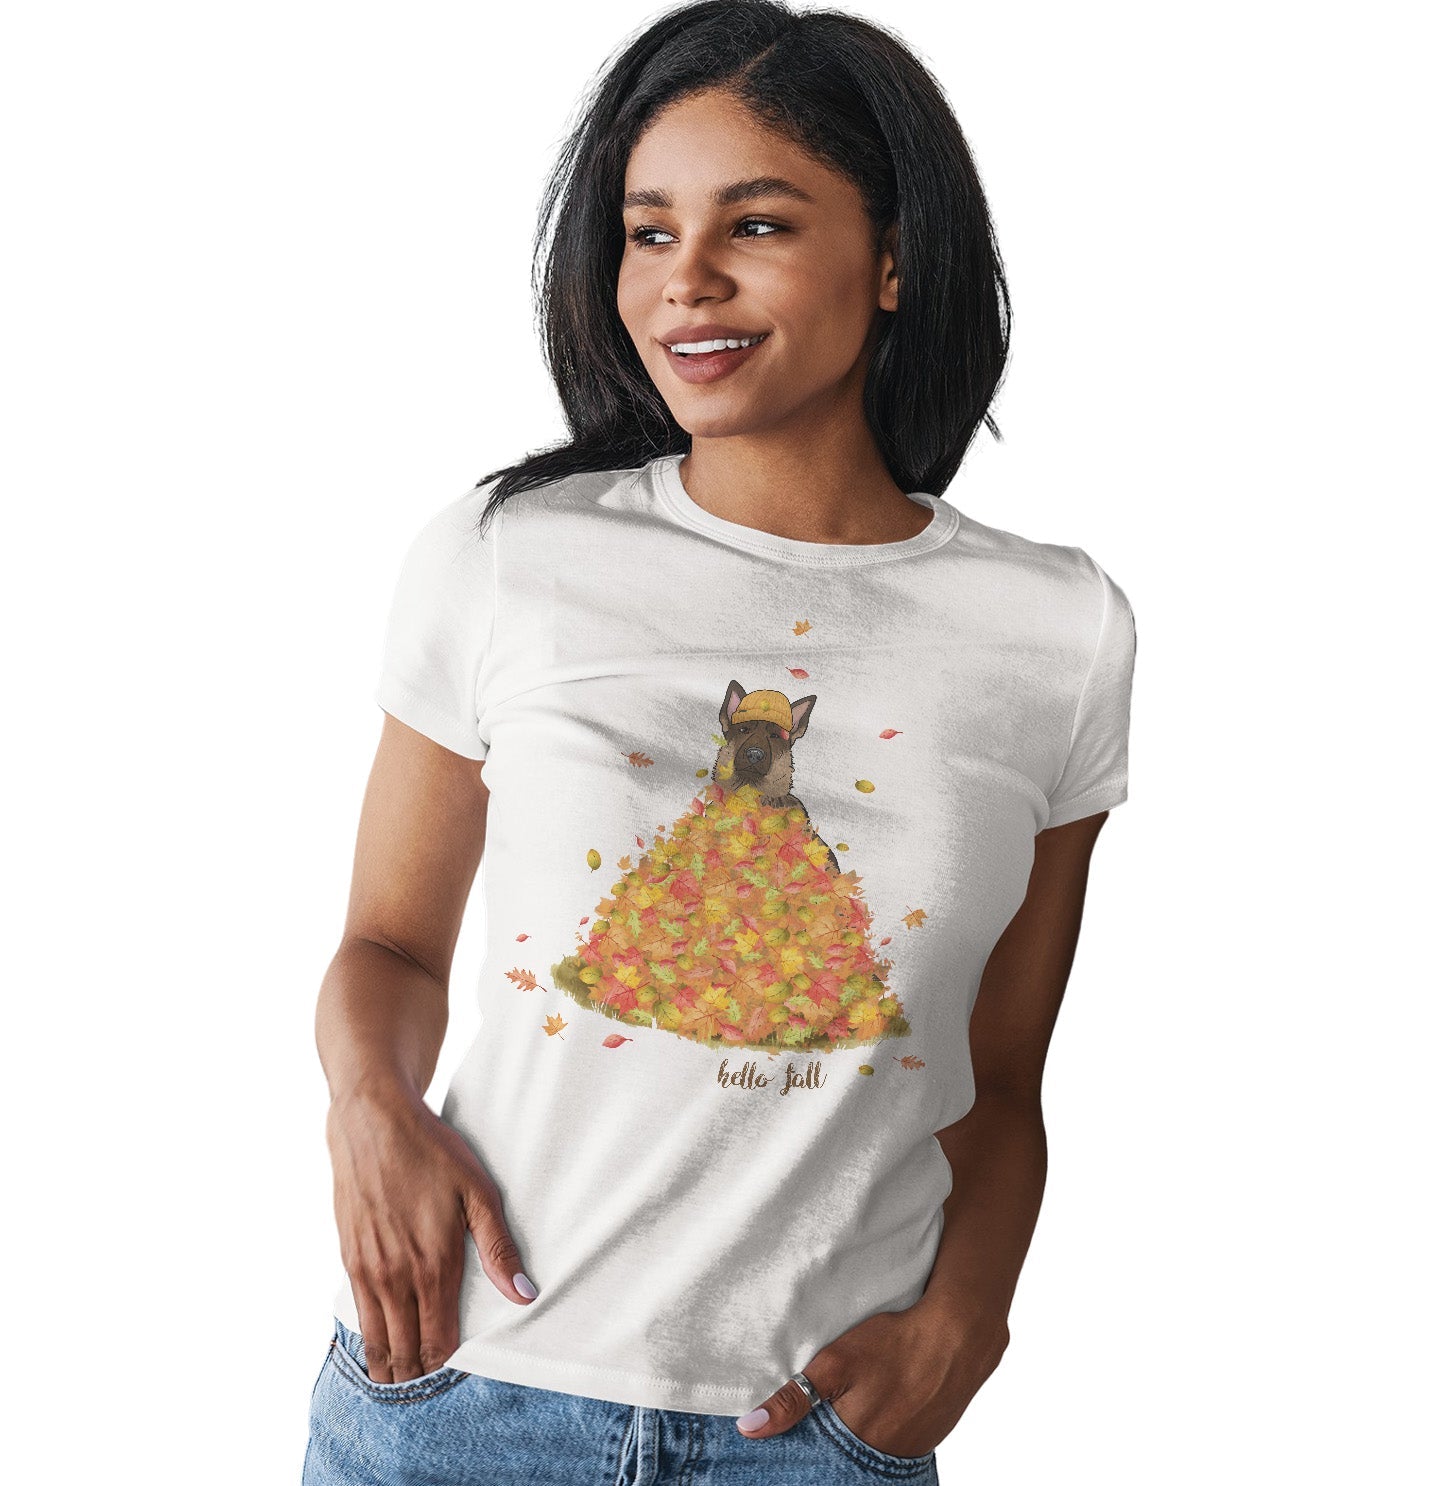 Leaf Pile and German Shepherd - Women's Fitted T-Shirt